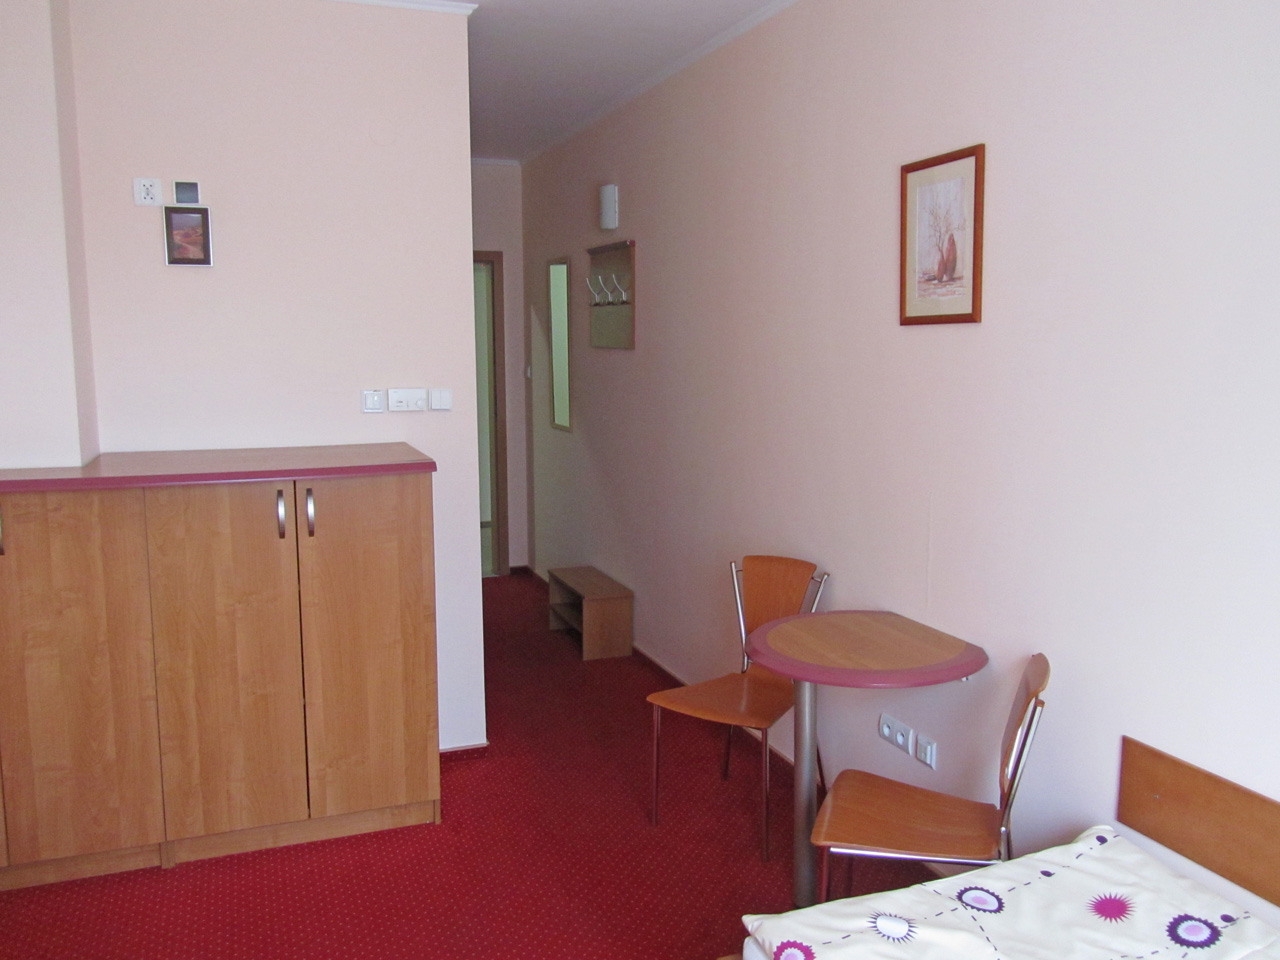 ROOMS Krosno accommodation in the city center, rest in Poland 08